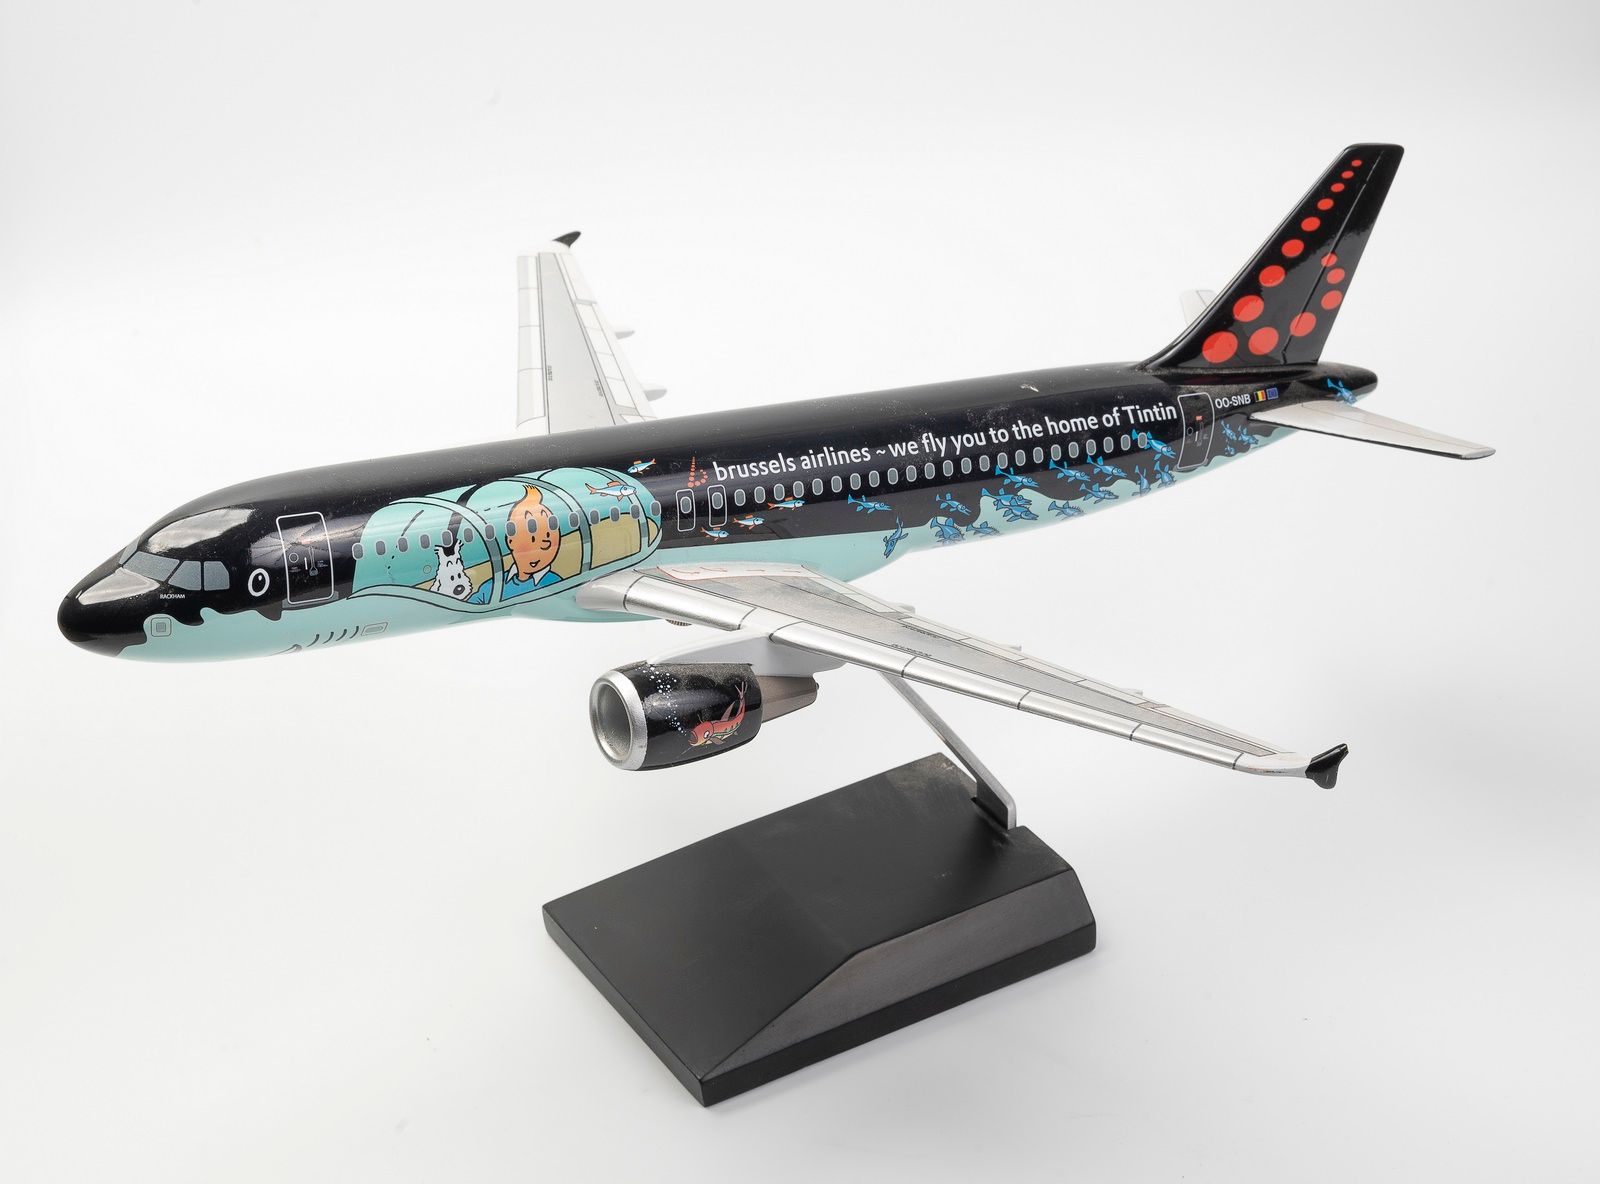 Null Tintin


HERGE / MOULINSART / BRUSSEL AIRLINES 


Modell des Flugzeugs Brus&hellip;